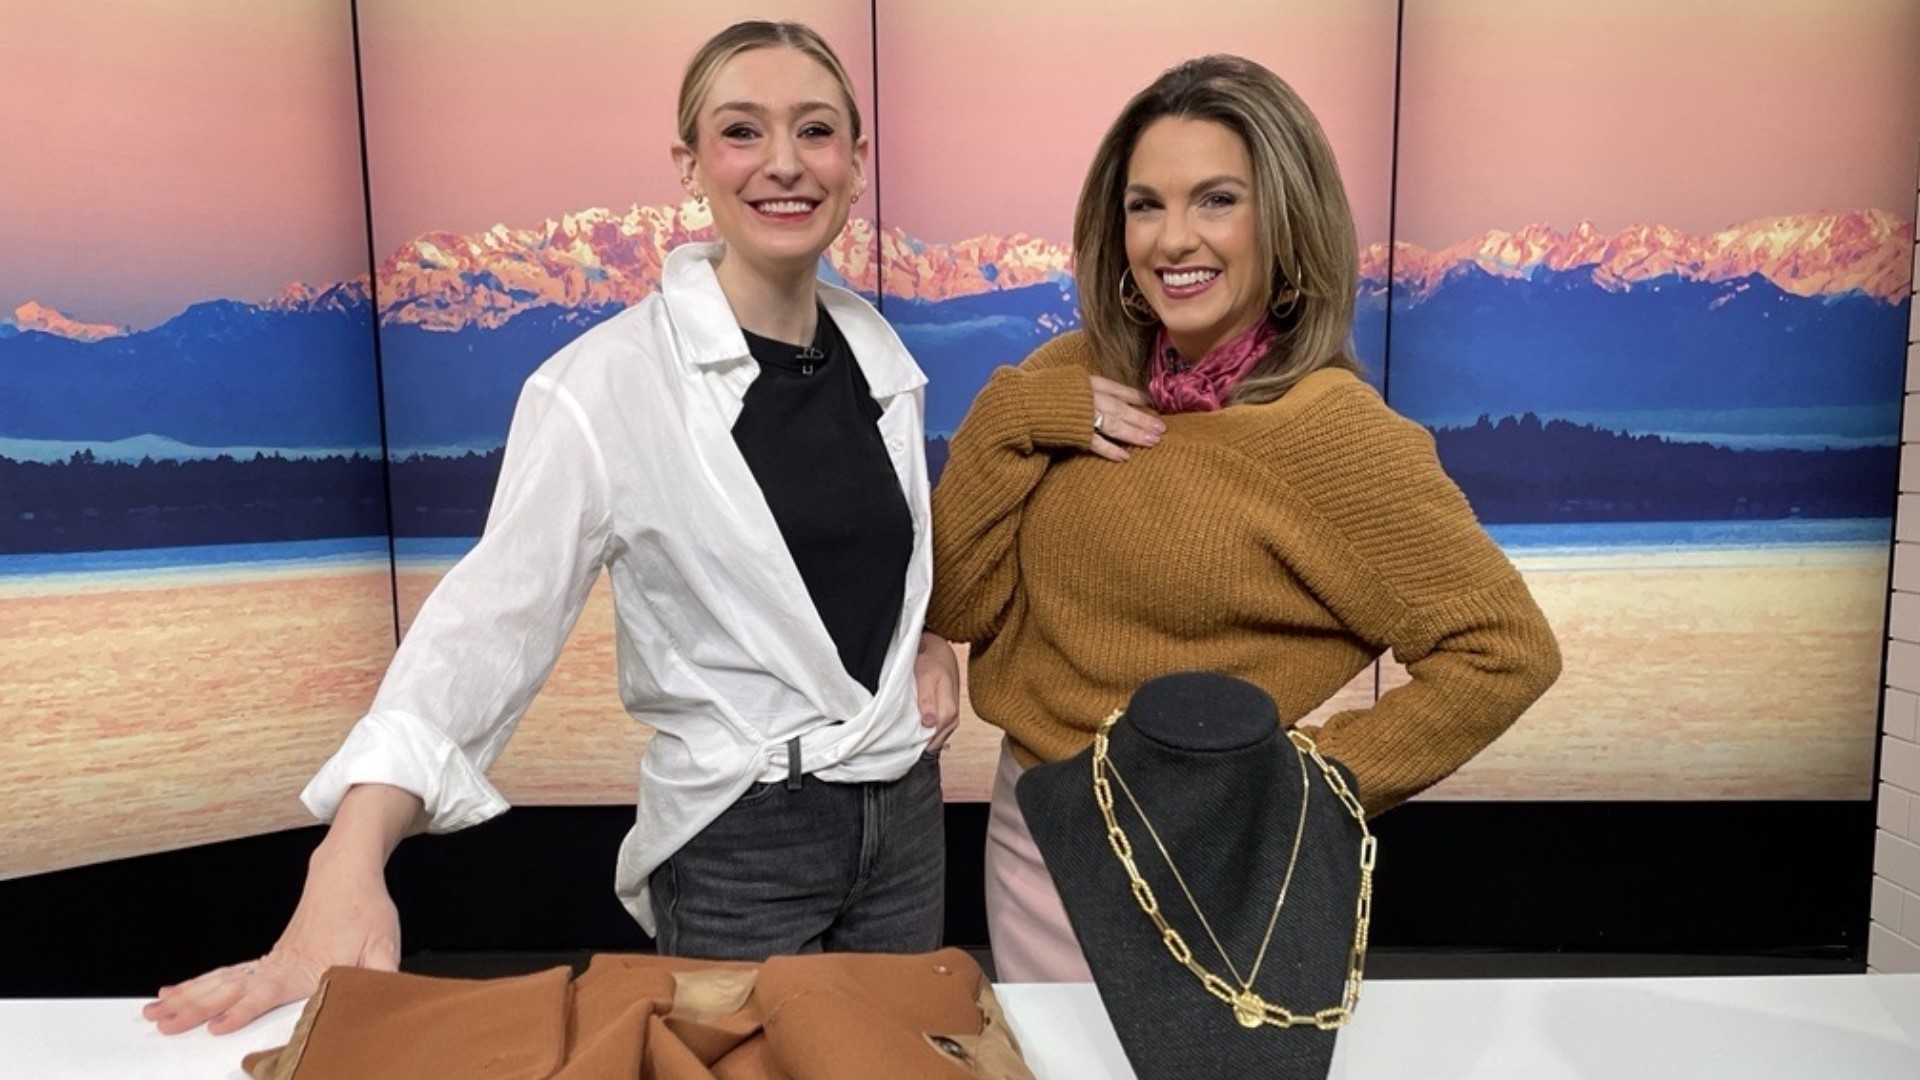 New Day Stylist Darcy Camden found a few fashion hacks on TikTok that will keep your sleeves up and help keep your wardrobe looking fresh and new. #newdaynw